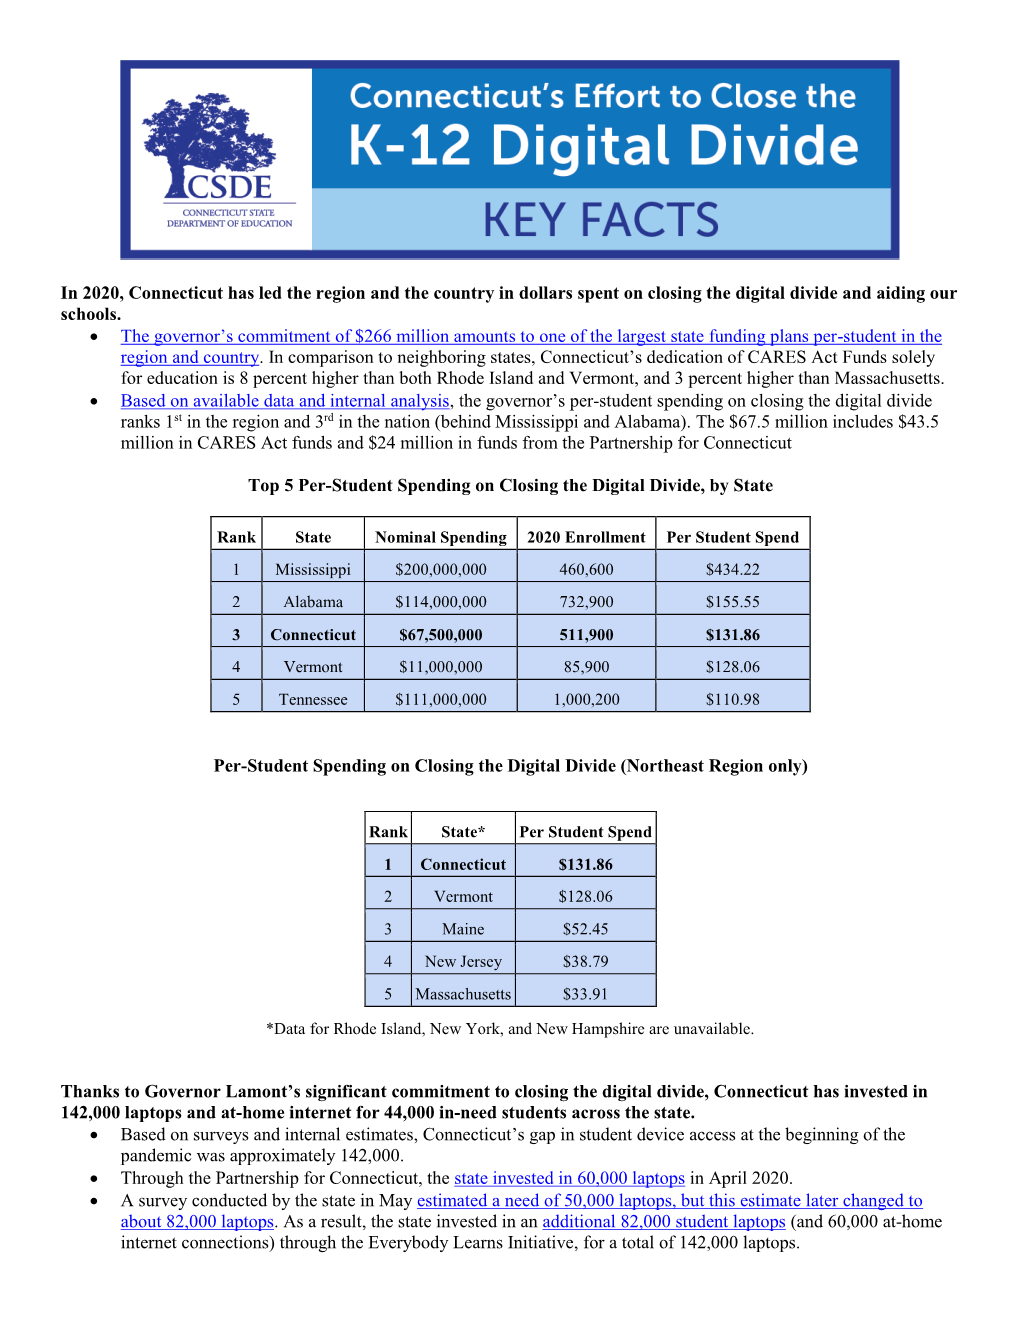 Fact Sheet on Connecticut's Efforts to Close the PK-12 Digital Divide